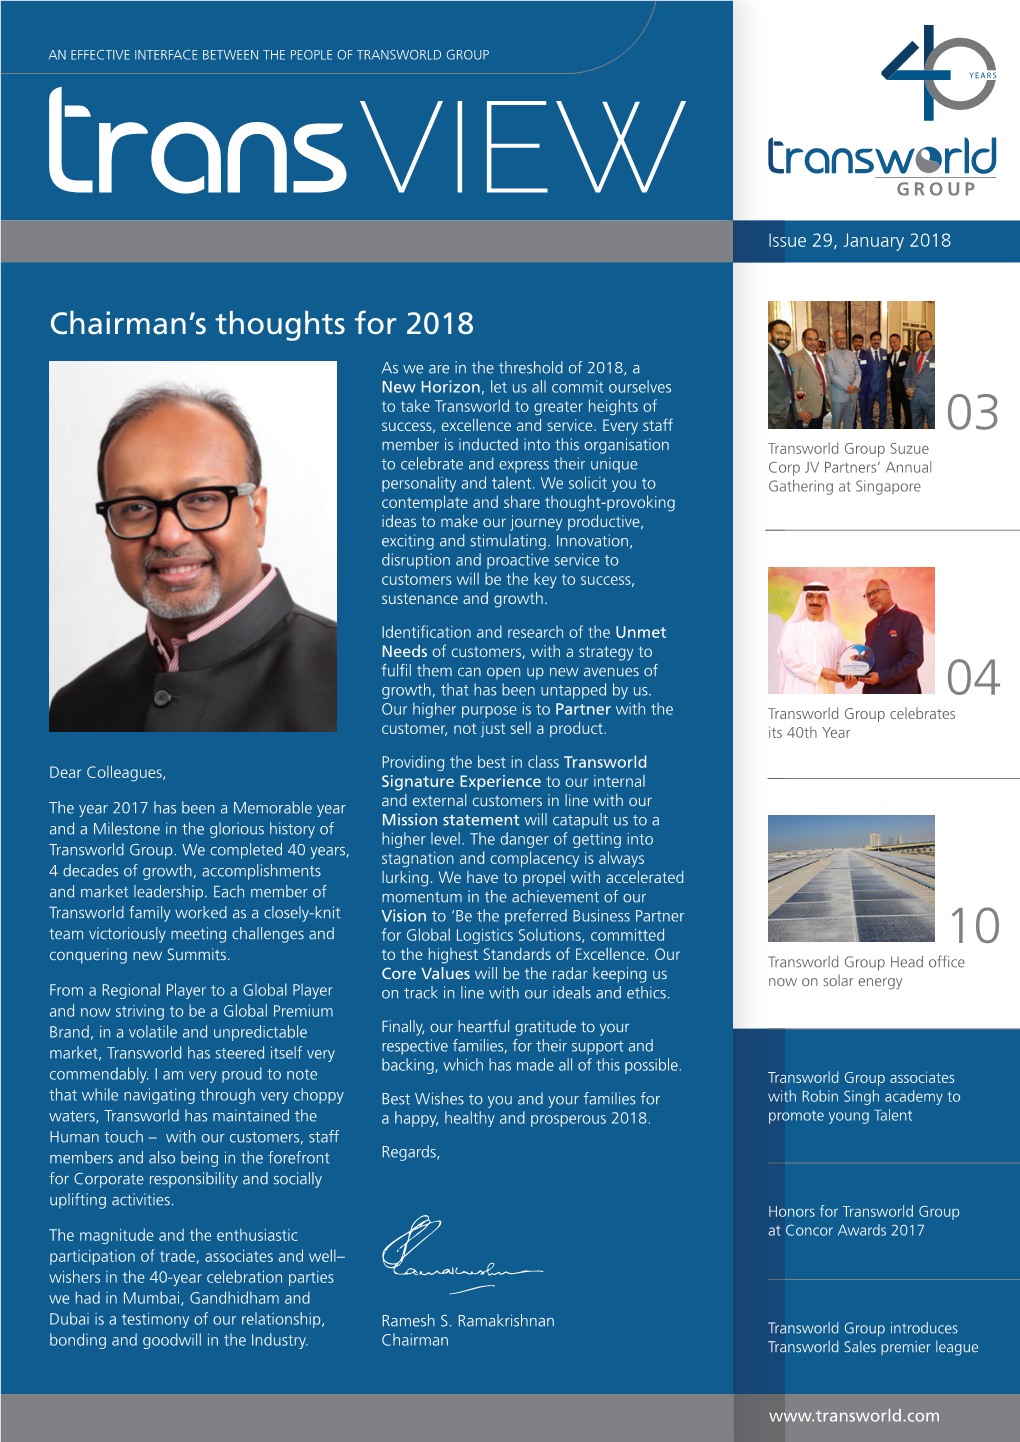 Chairman's Thoughts for 2018